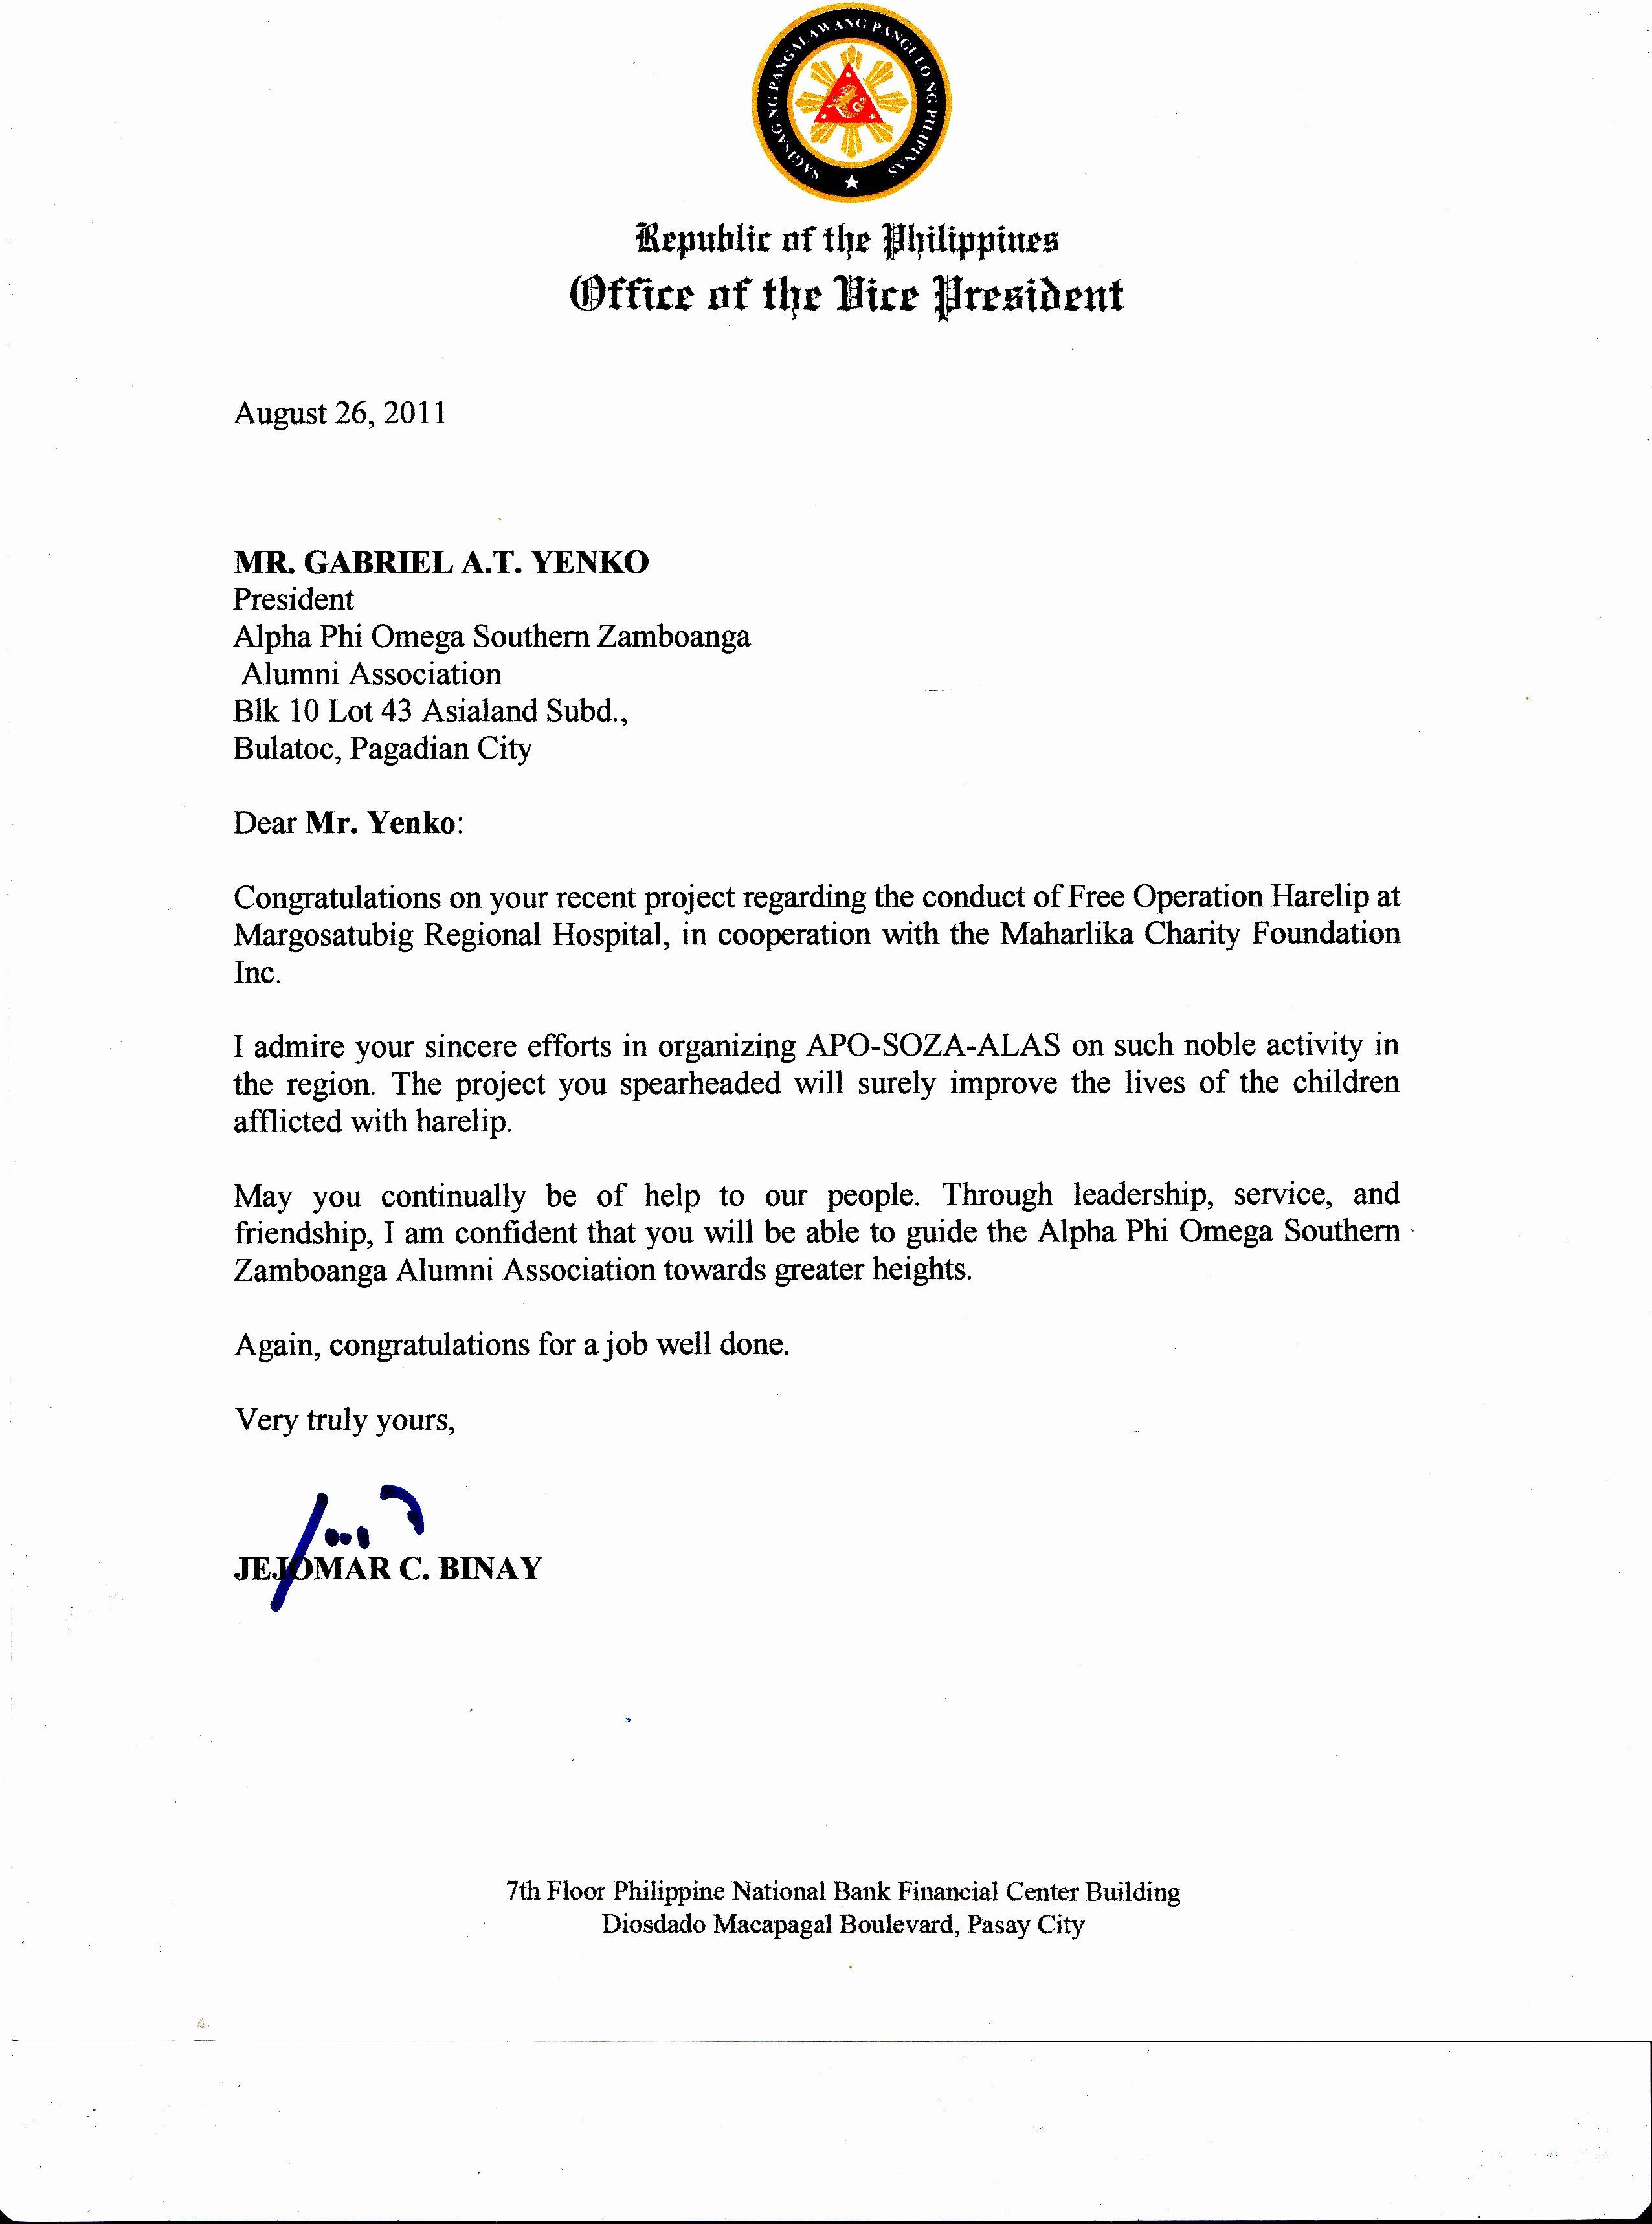 Letters Of Commendation Sample Luxury File Vp Binay Mendation Letter Philippines